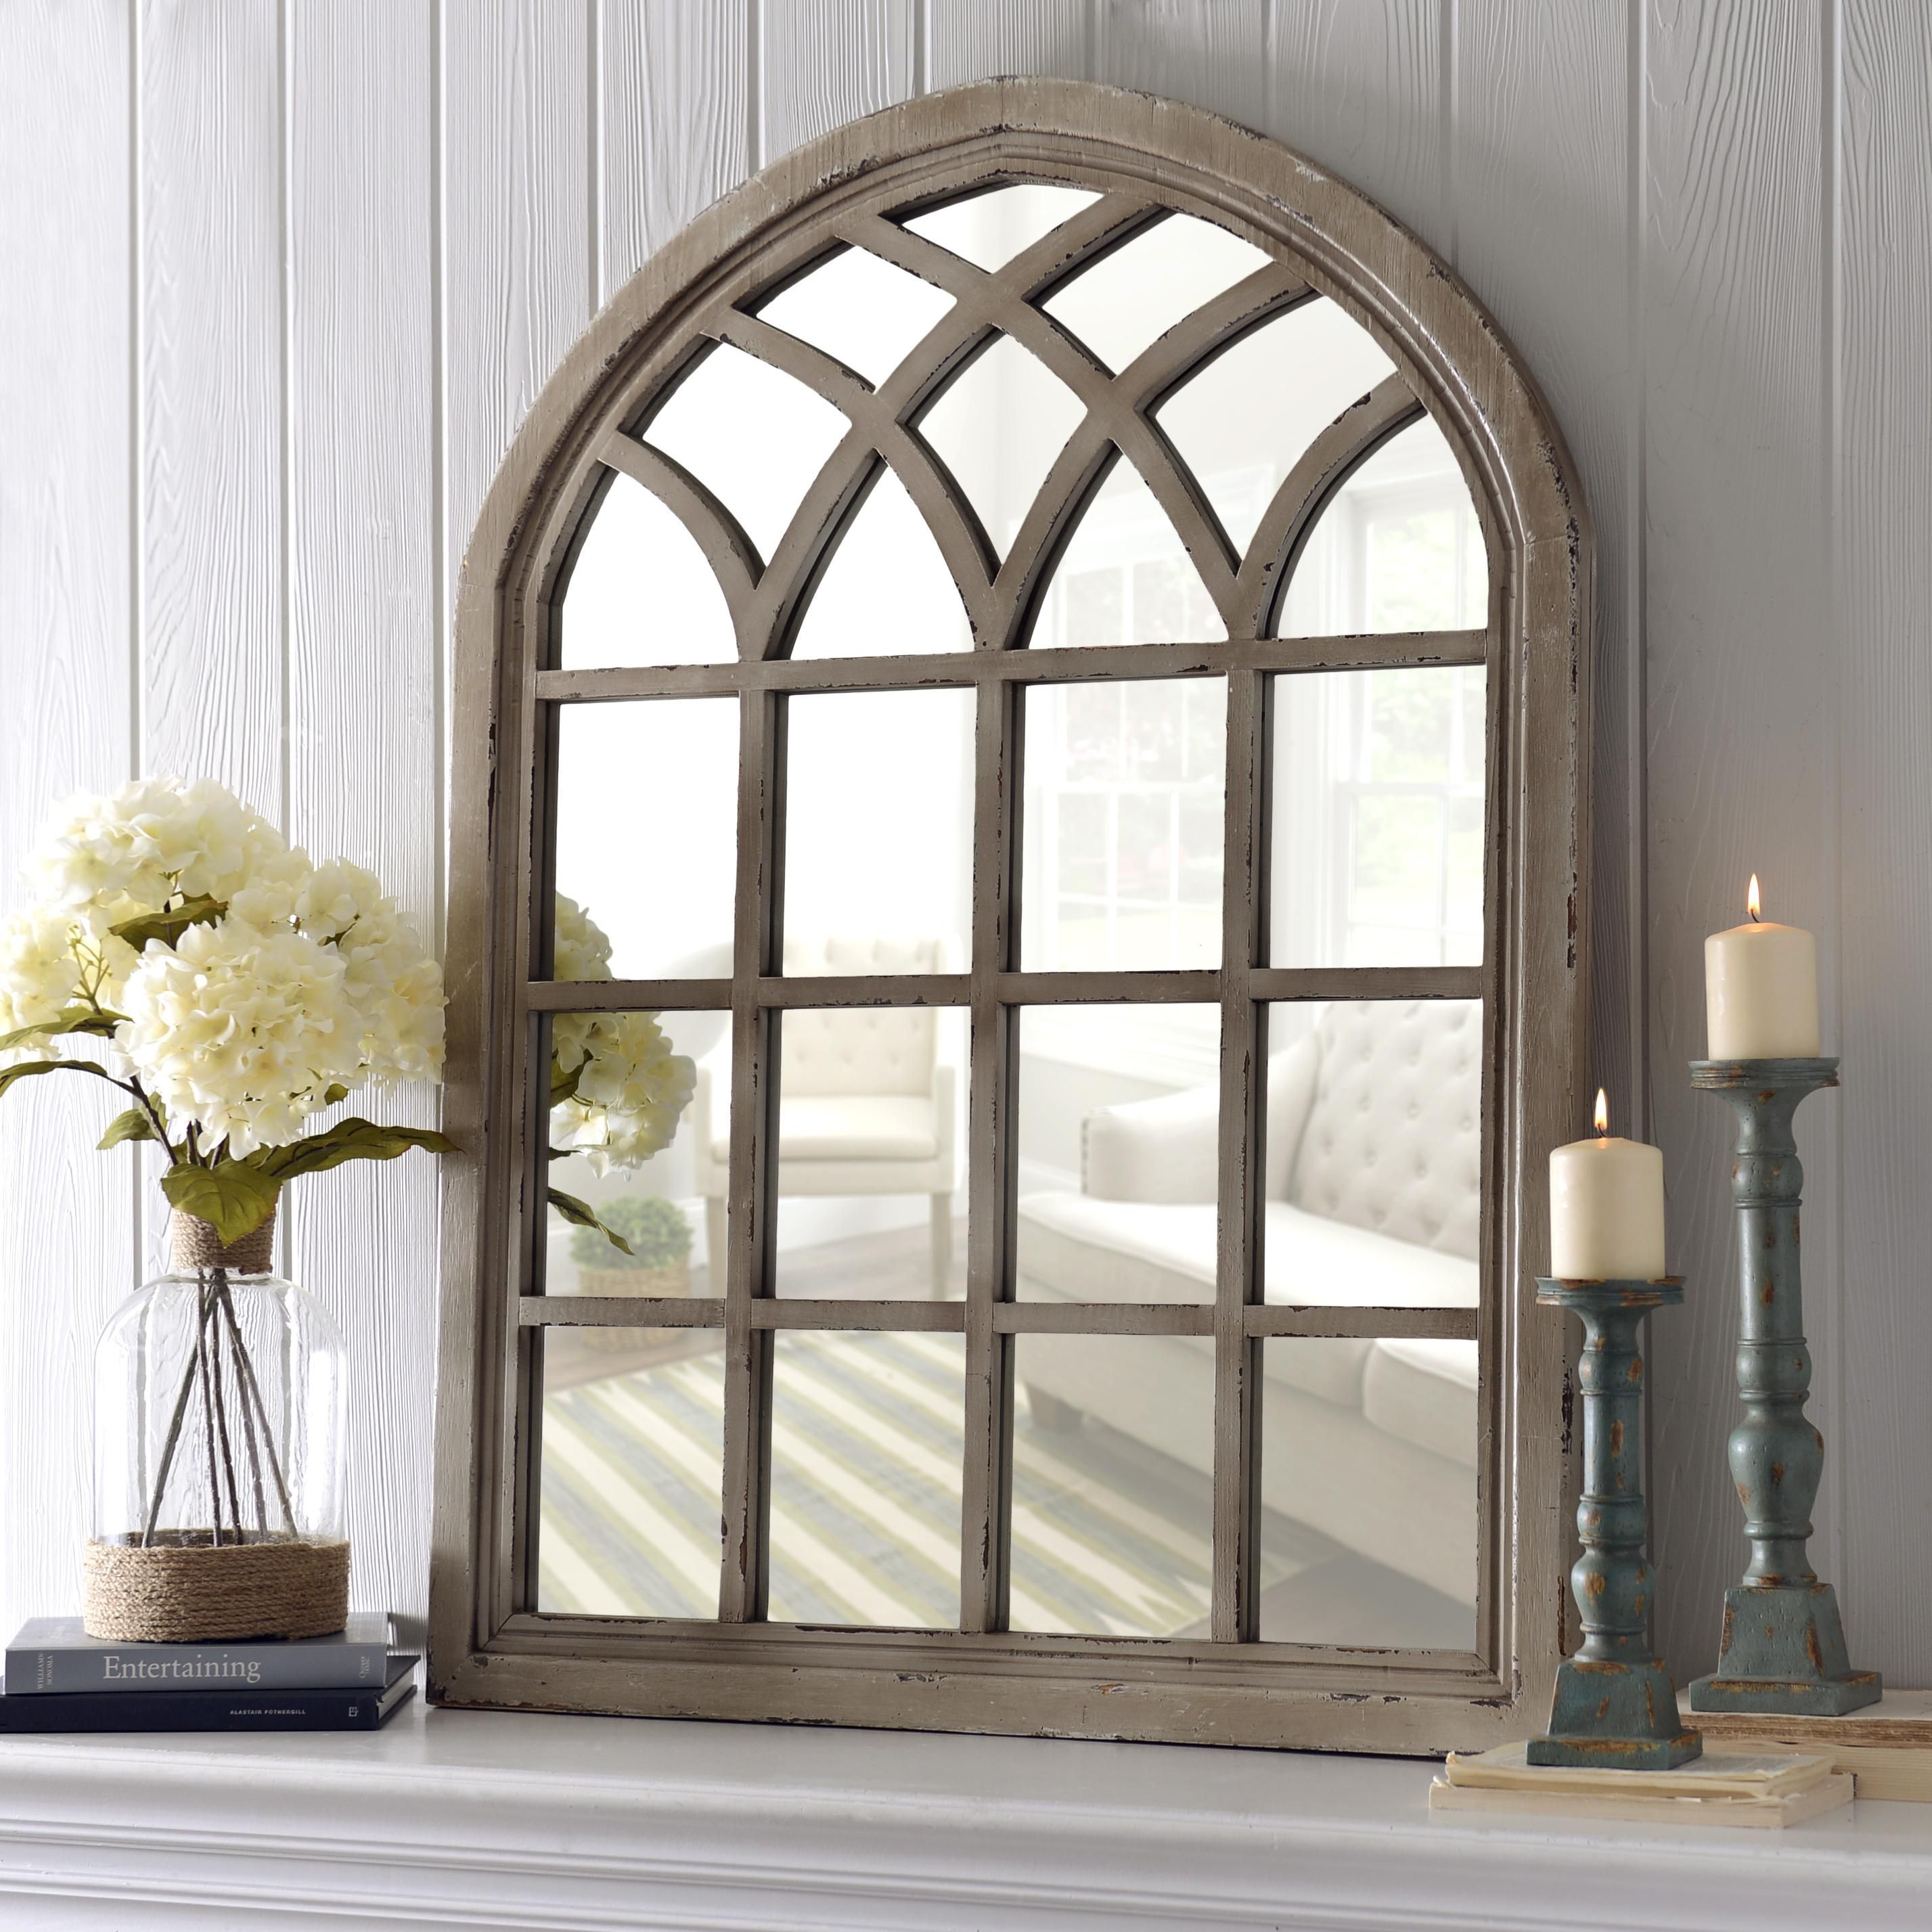 Product Details Distressed Cream Sadie Arch Mirror | Home Regarding Window Cream Wood Wall Mirrors (View 11 of 20)